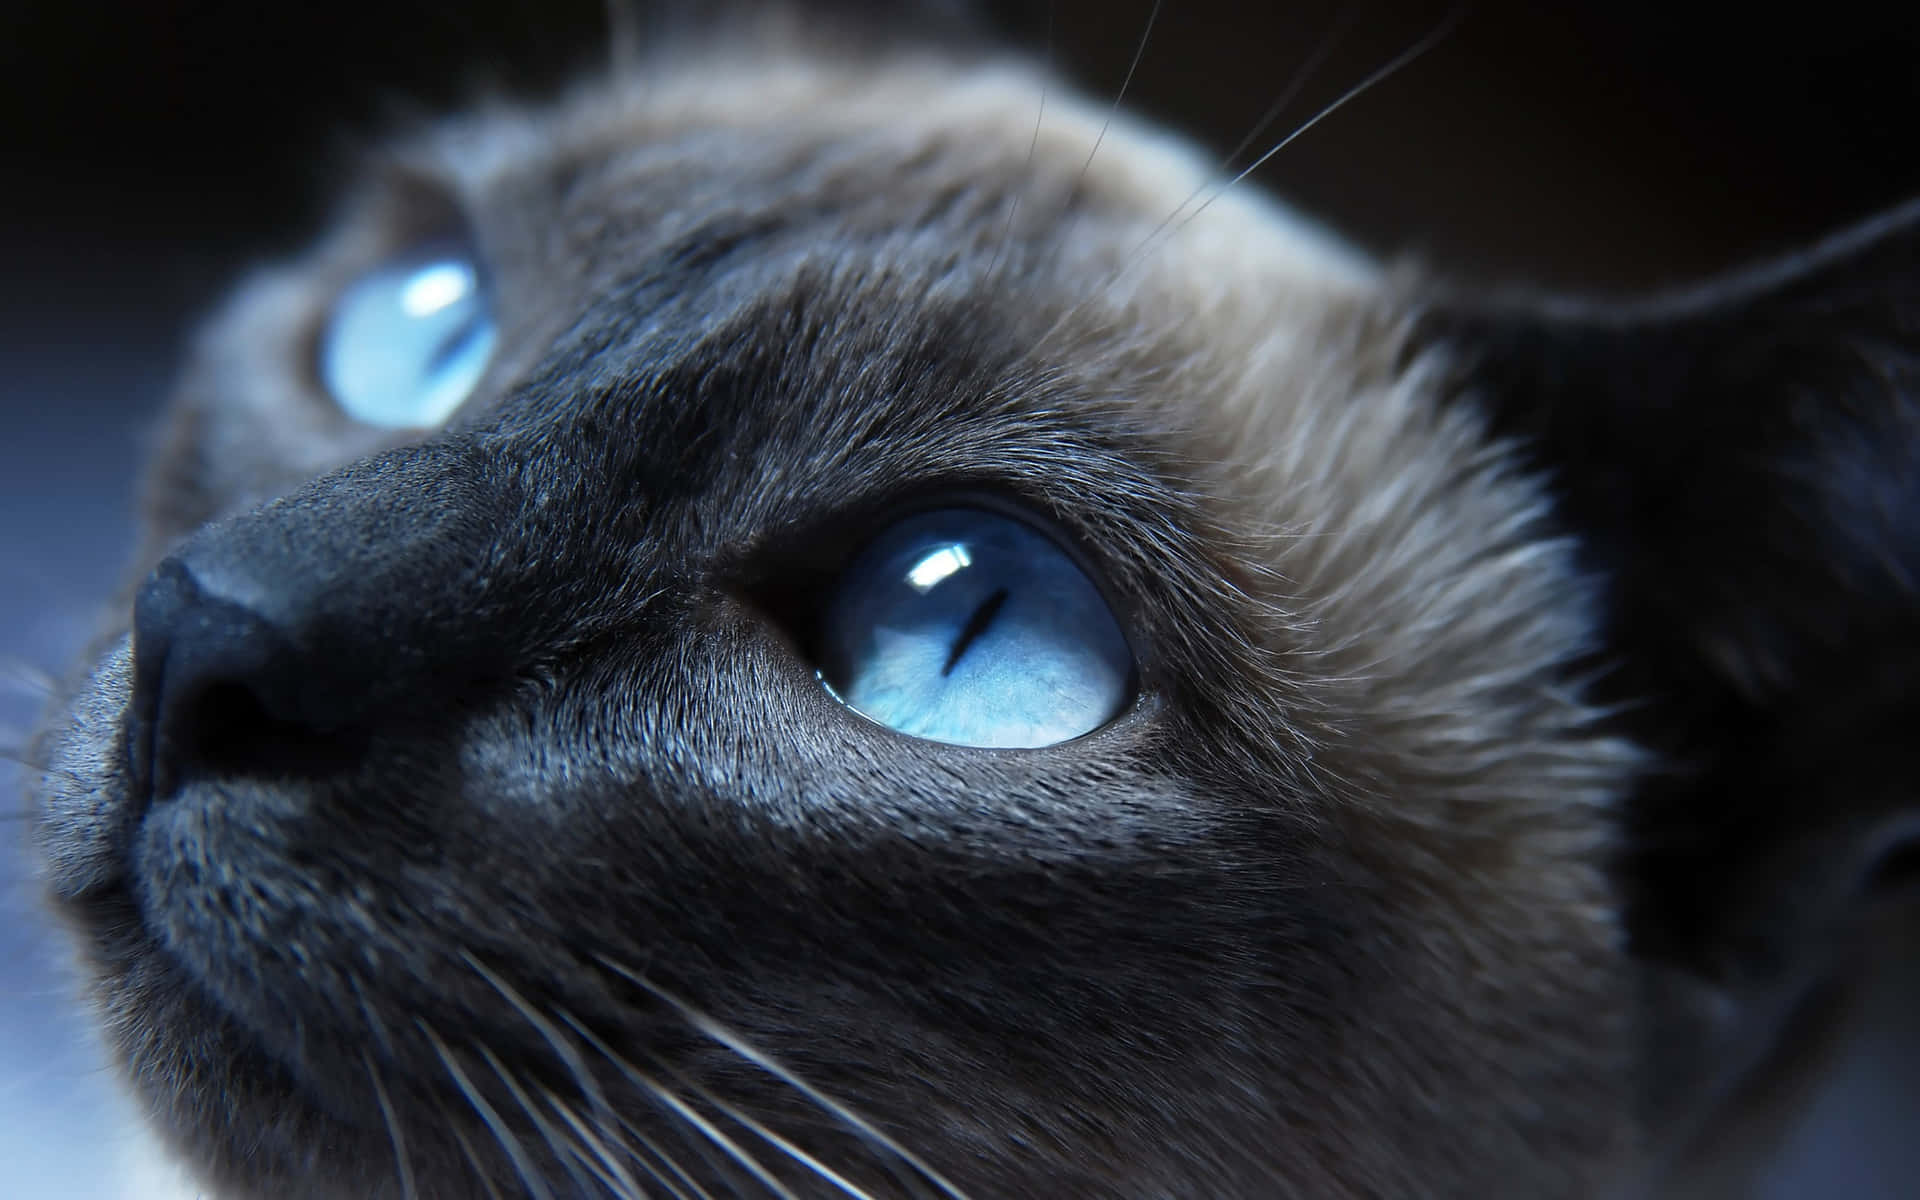 A Siamese Cat With Blue Eyes Looking Up